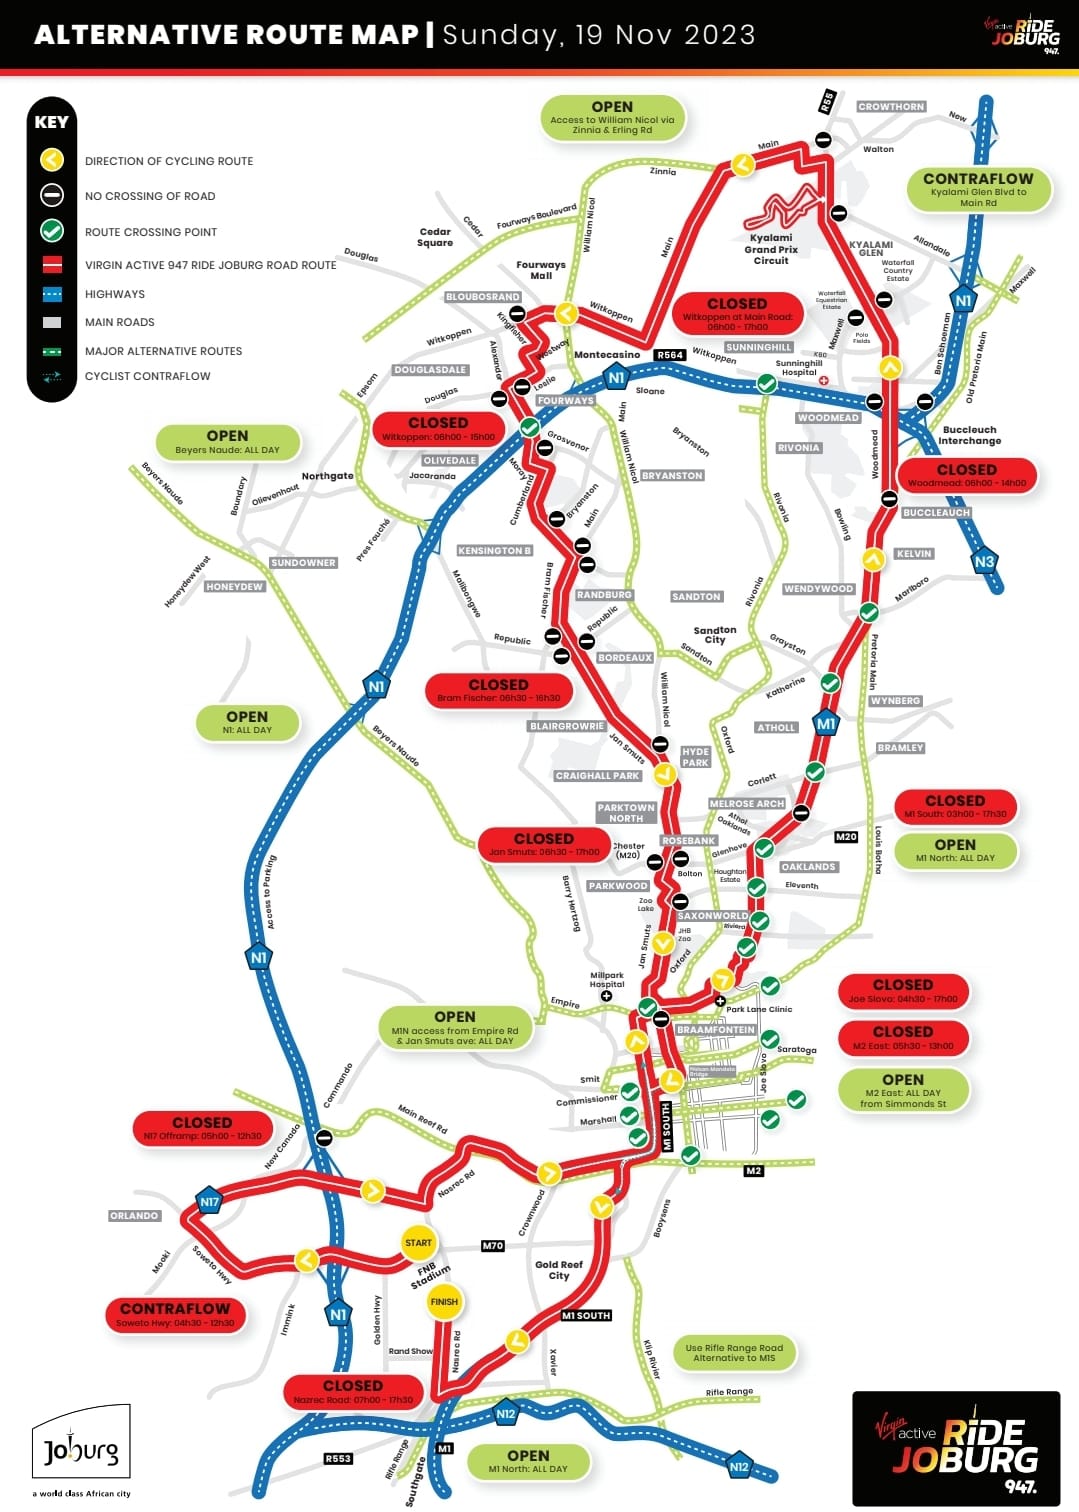 Streets and areas affected by the Virgin Active 94.7 Ride Joburg Cycle Race on Sunday 19 November 2023